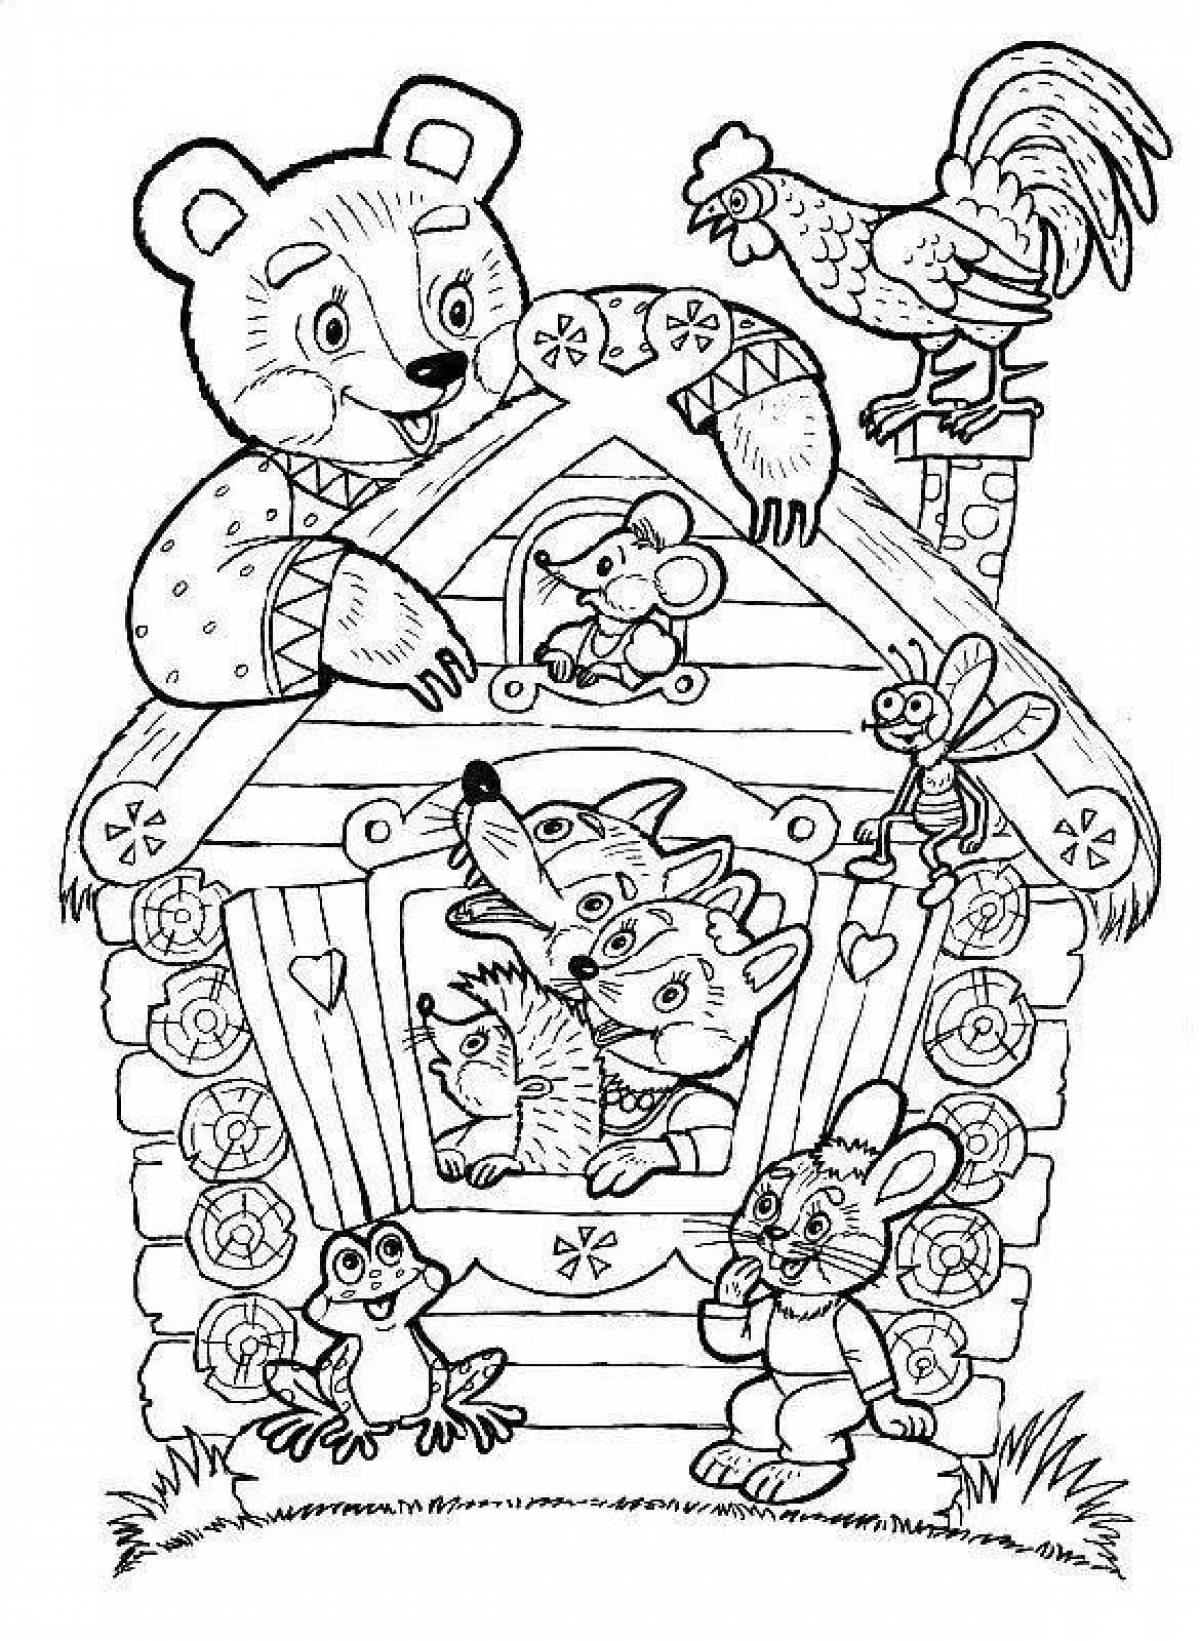 Fascinating coloring book for children's fairy tales